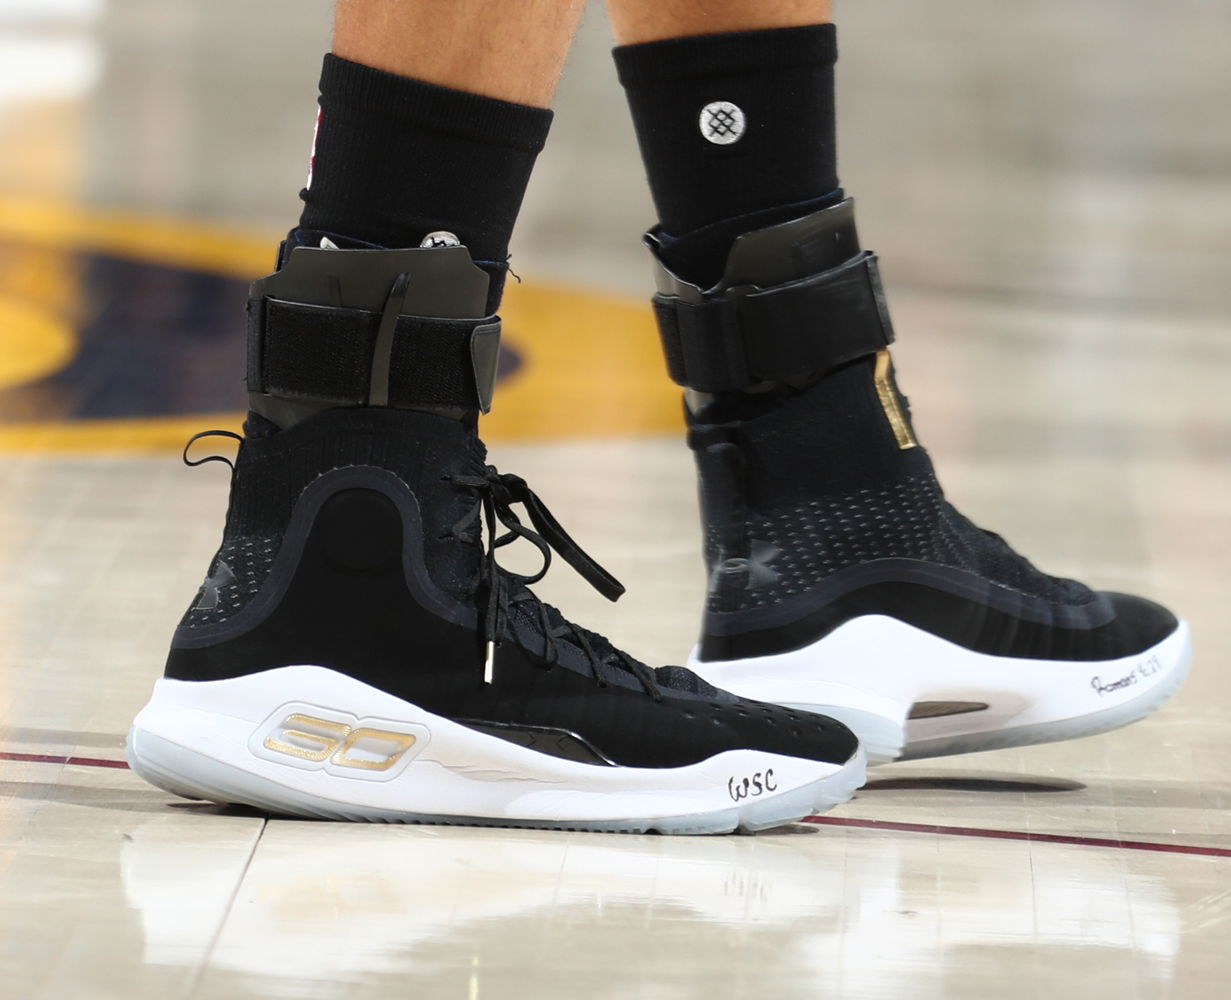 The Under Armour Curry 4 Expected To 